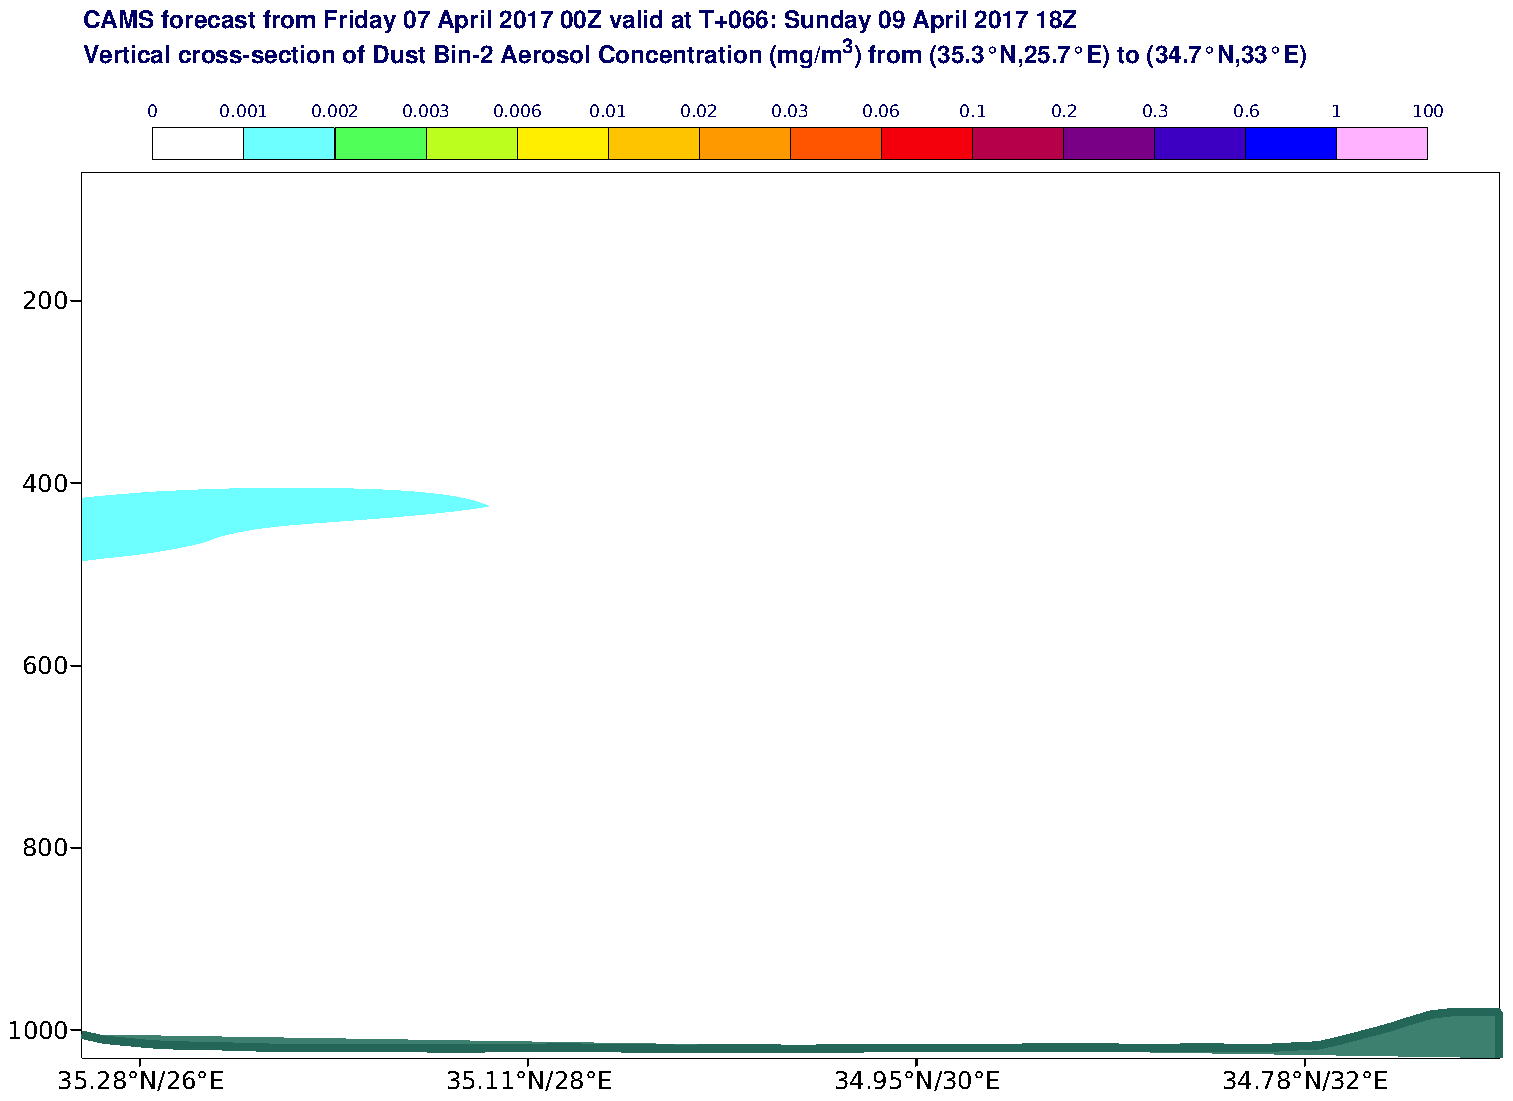 Vertical cross-section of Dust Bin-2 Aerosol Concentration (mg/m3) valid at T66 - 2017-04-09 18:00